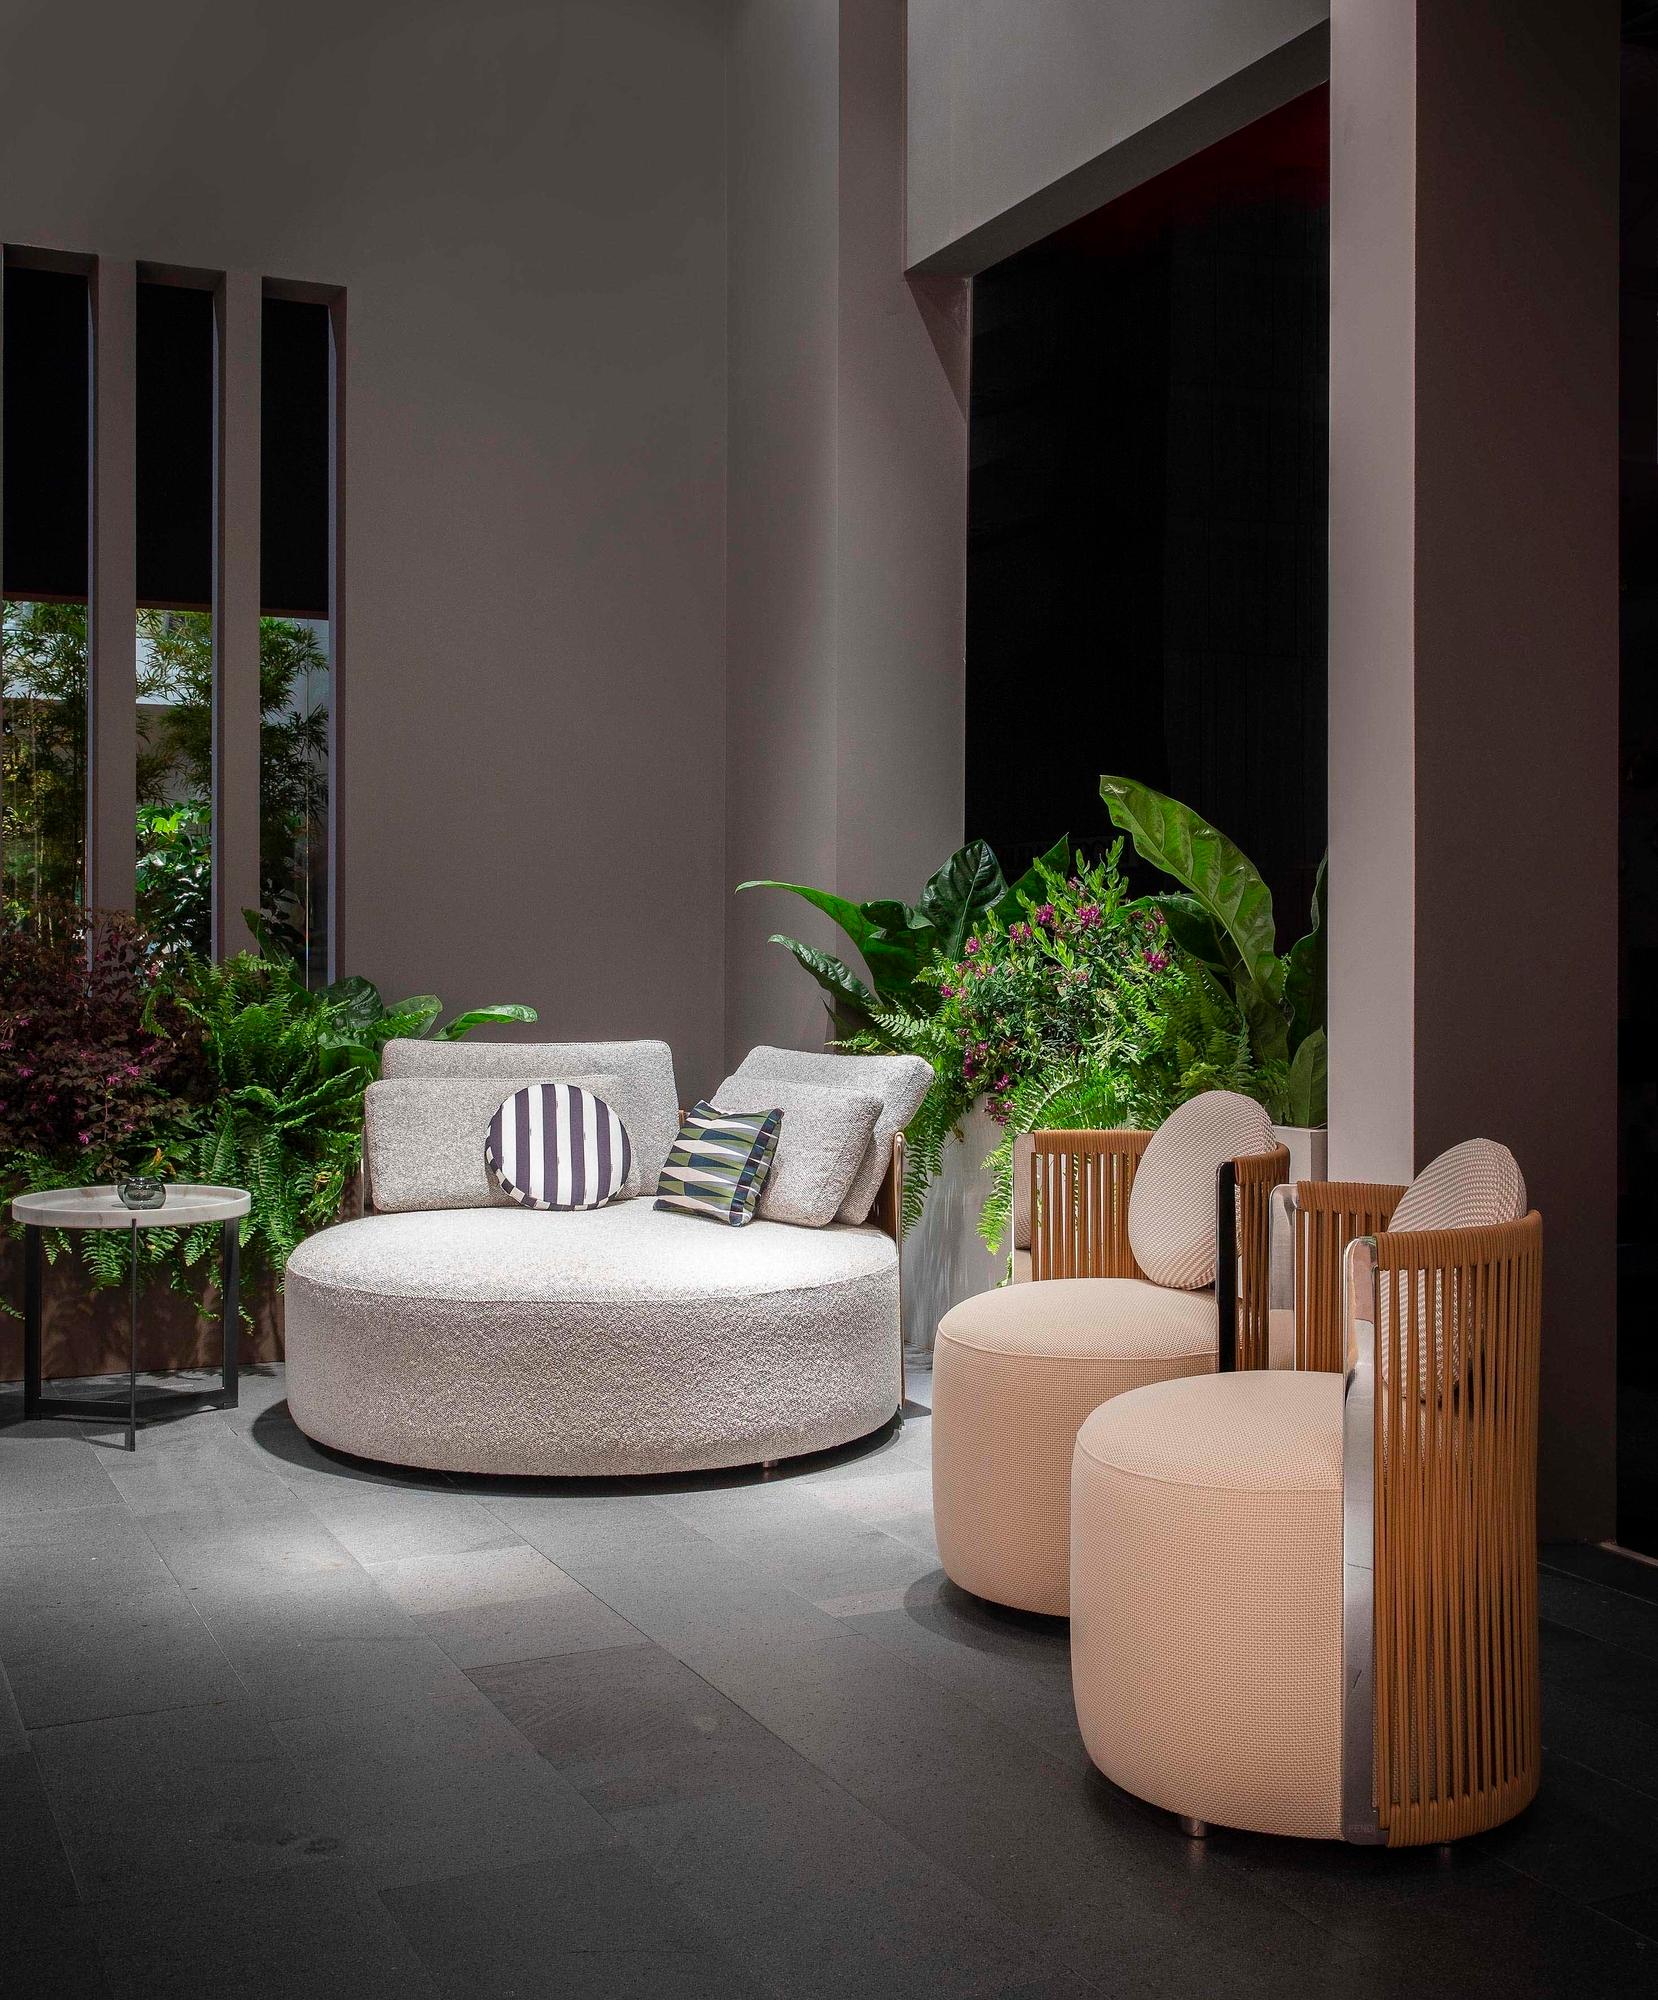 Set/2 Modern Thea Armchair Natural and Blue Leather Handmade in Italy by Fendi

Your beautifully designed outdoors call for equally sophisticated seating arrangements. The Thea collection bear the unmistakable mark of the legendary Italian mansion.